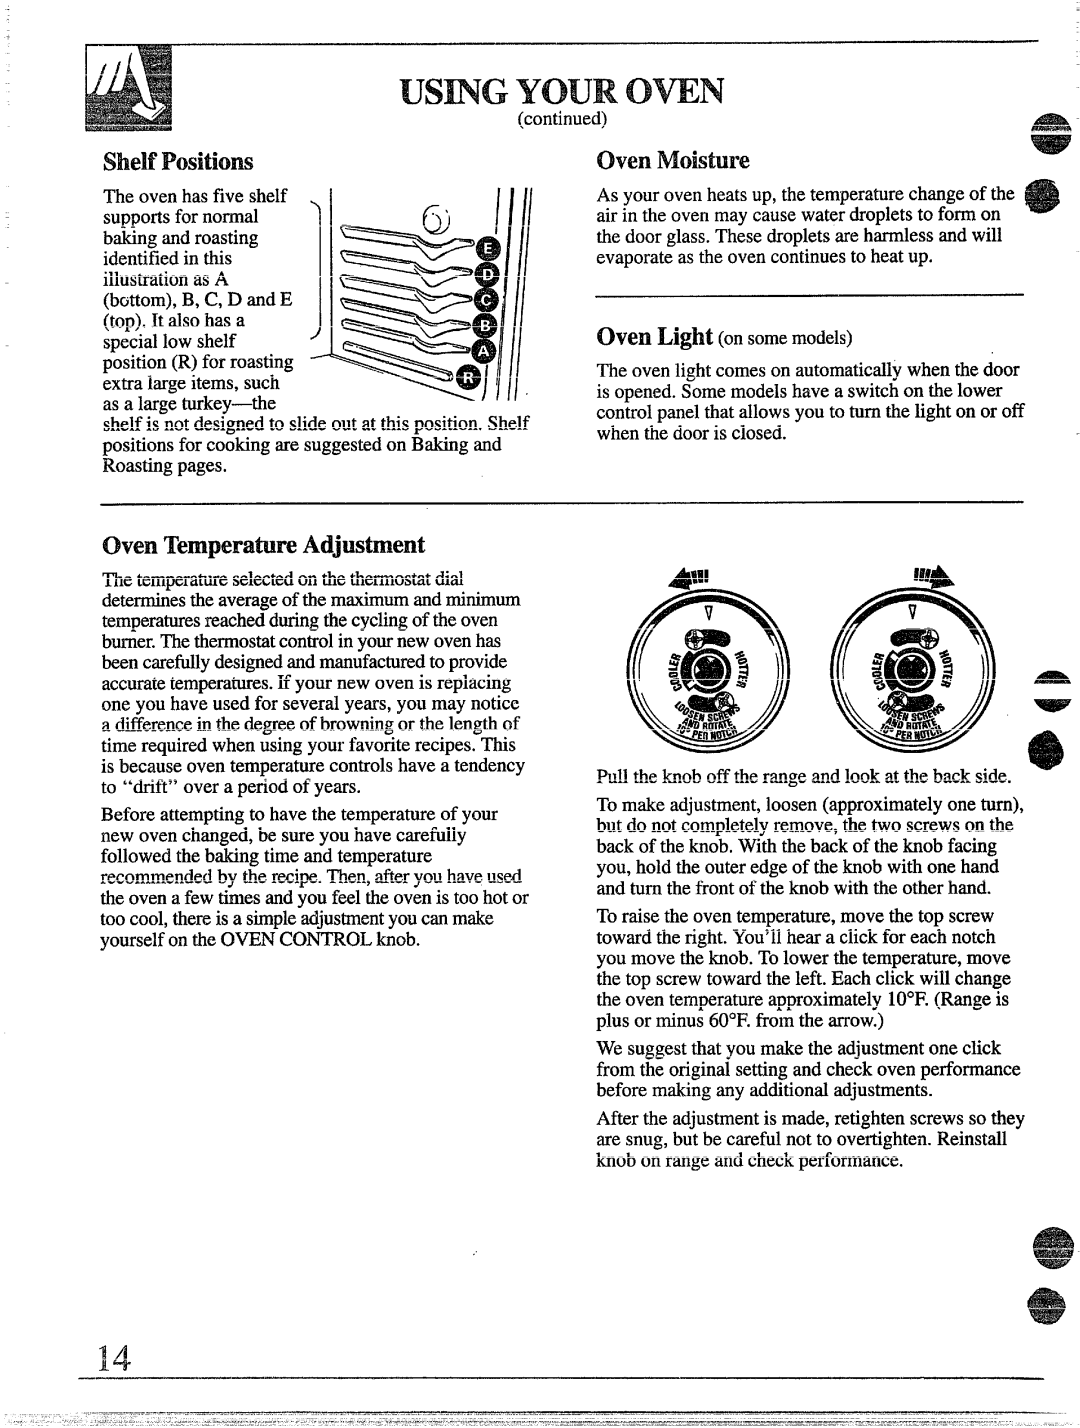 GE 49-8338 installation instructions Usm~YOUR owN, Oven Temperature Adjustment 